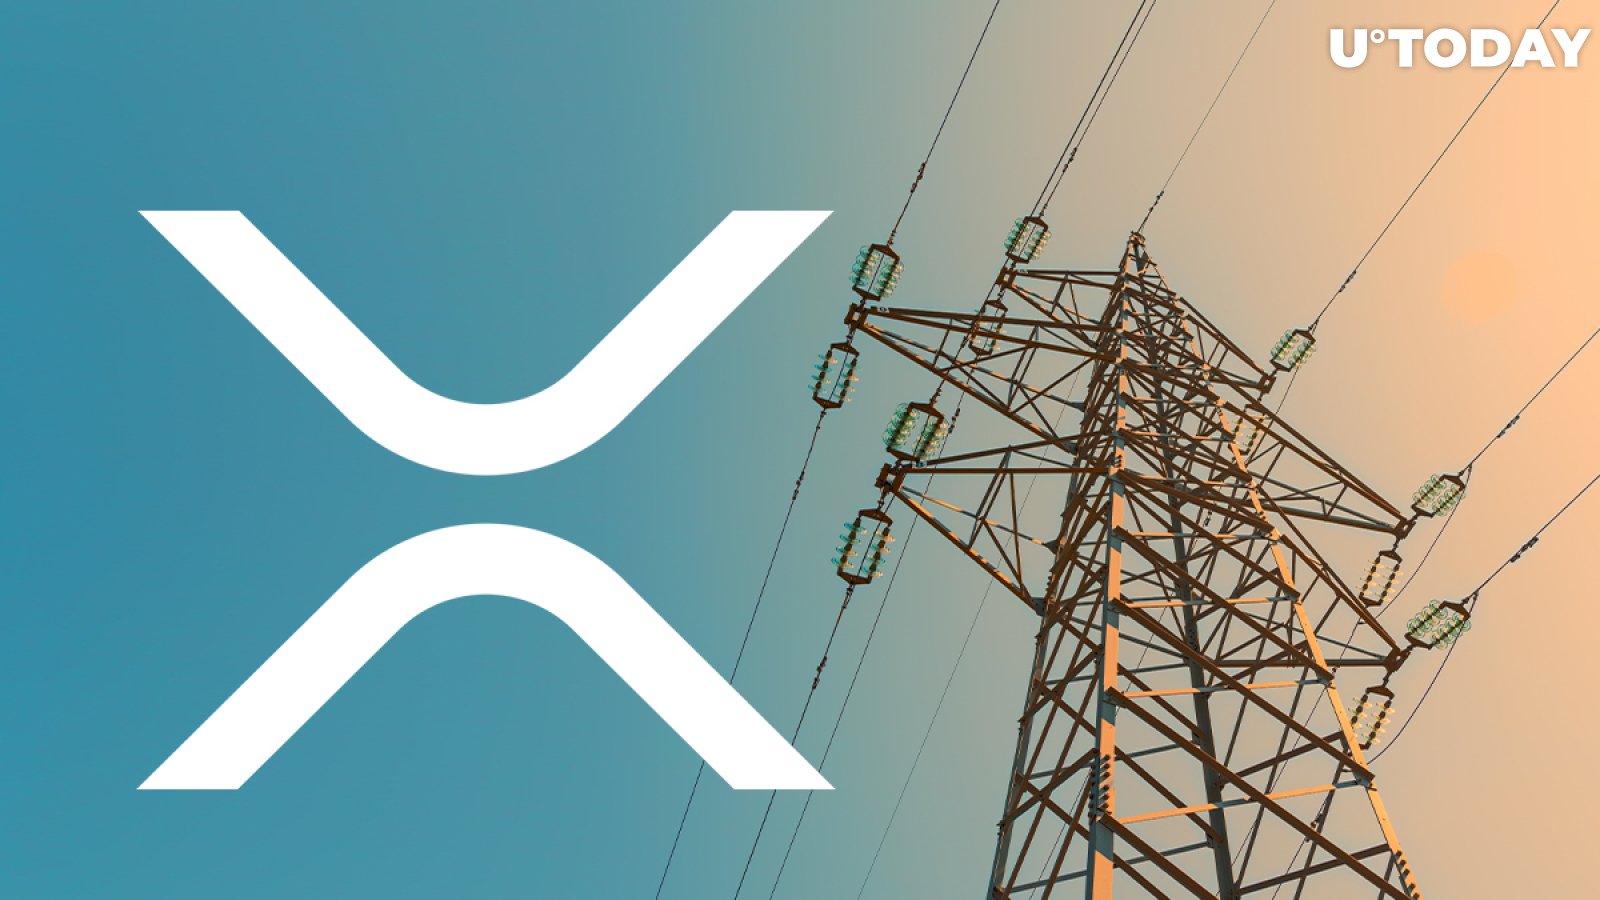 XRP Has Uncanny Correlation to Stock of This Clean Energy Company